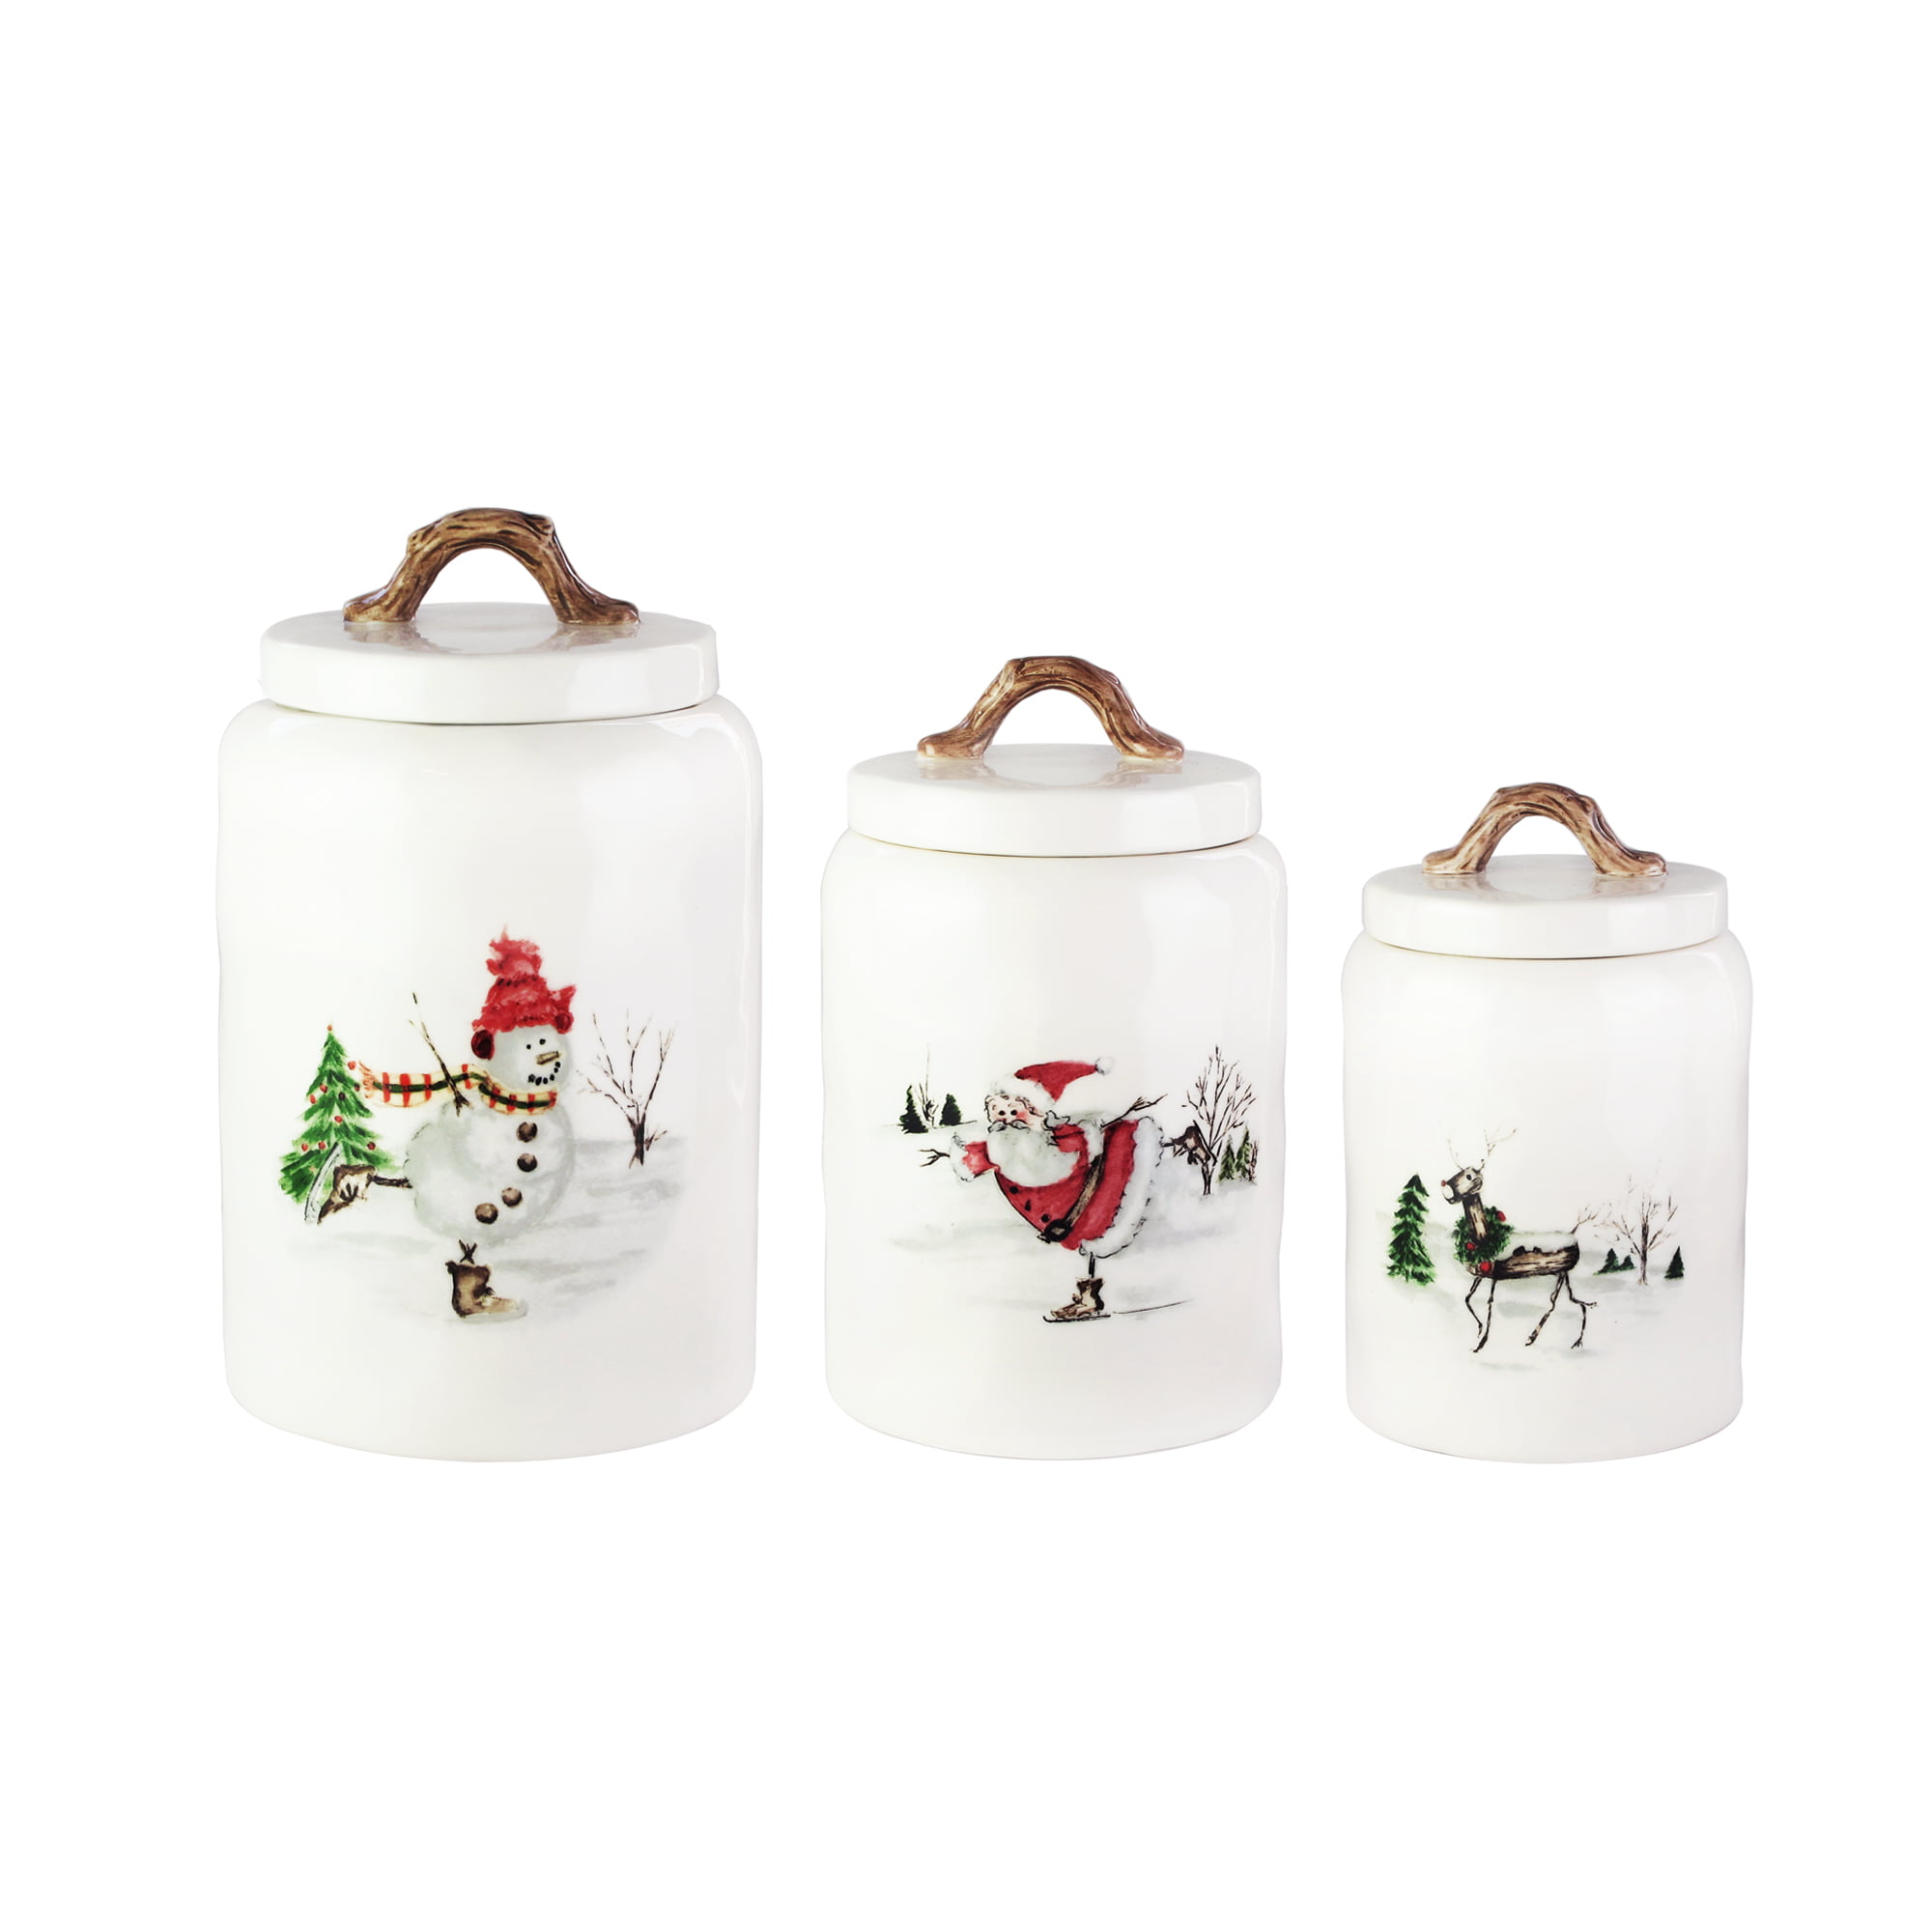 Canister Set of 3 Winter Themed with Snowmen Tops by Fitz and Floyd 78279 